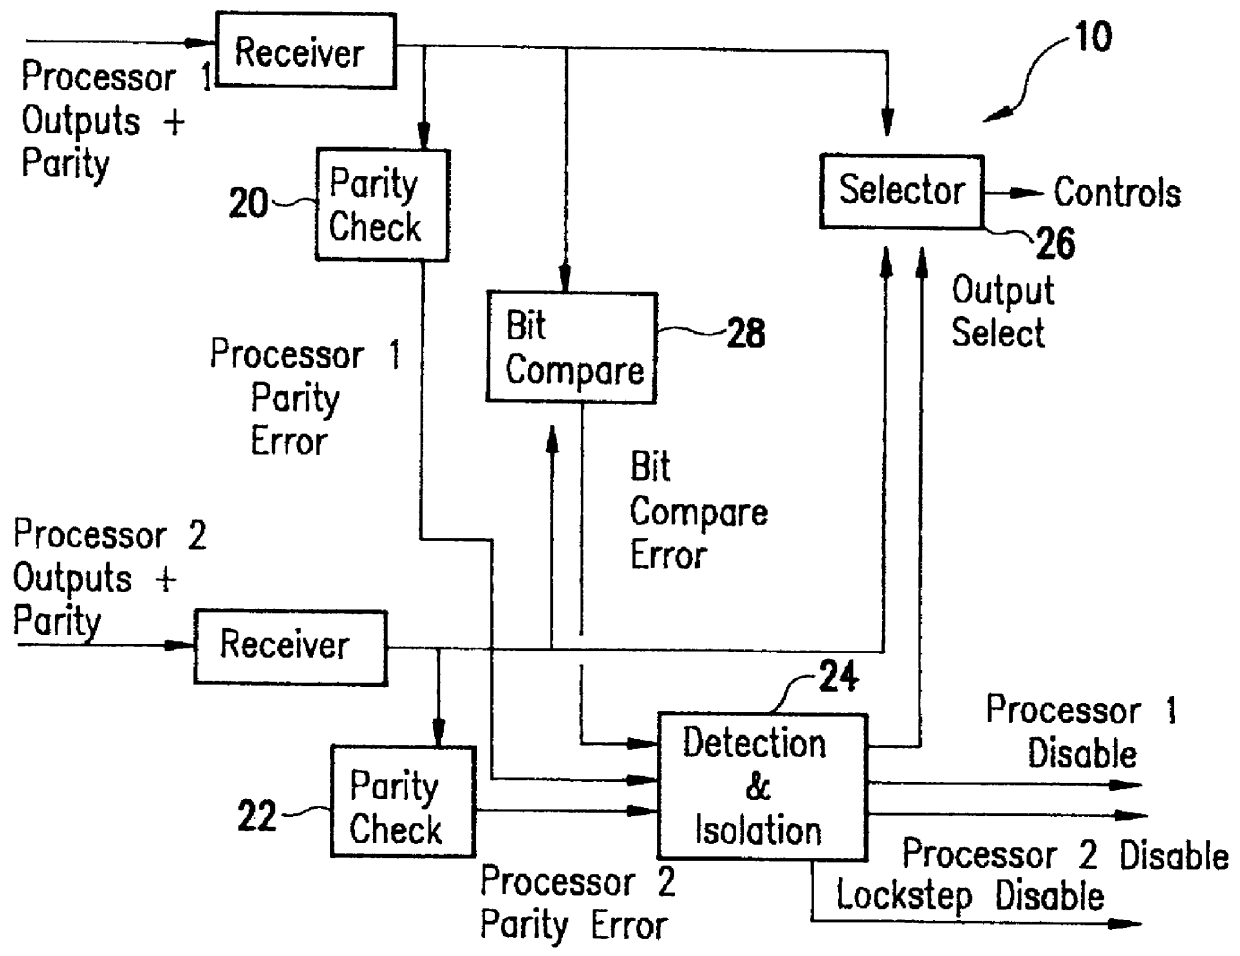 Error detection and fault isolation for lockstep processor systems